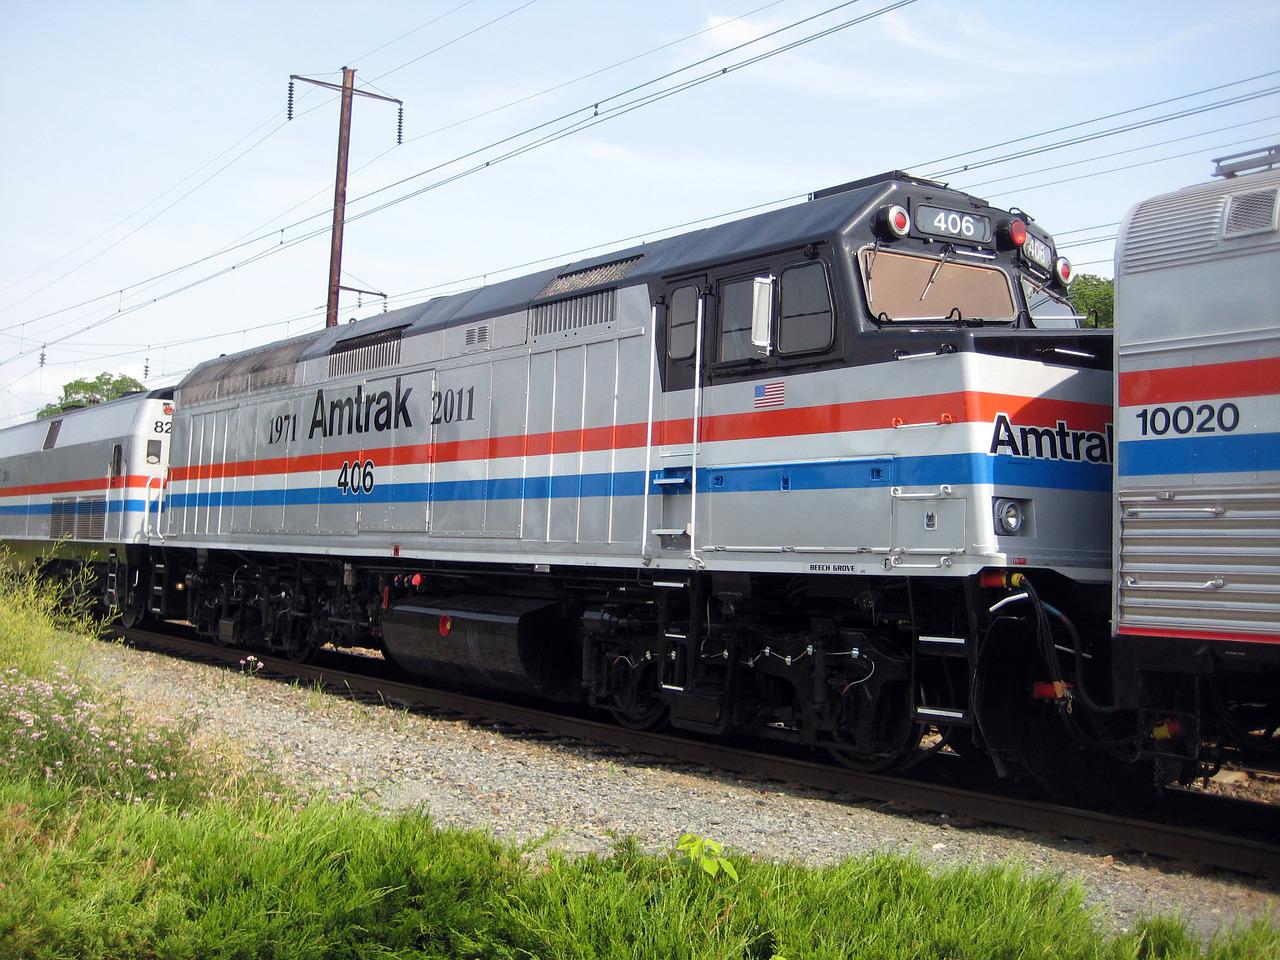 How To Get The Amtrak Military Discount